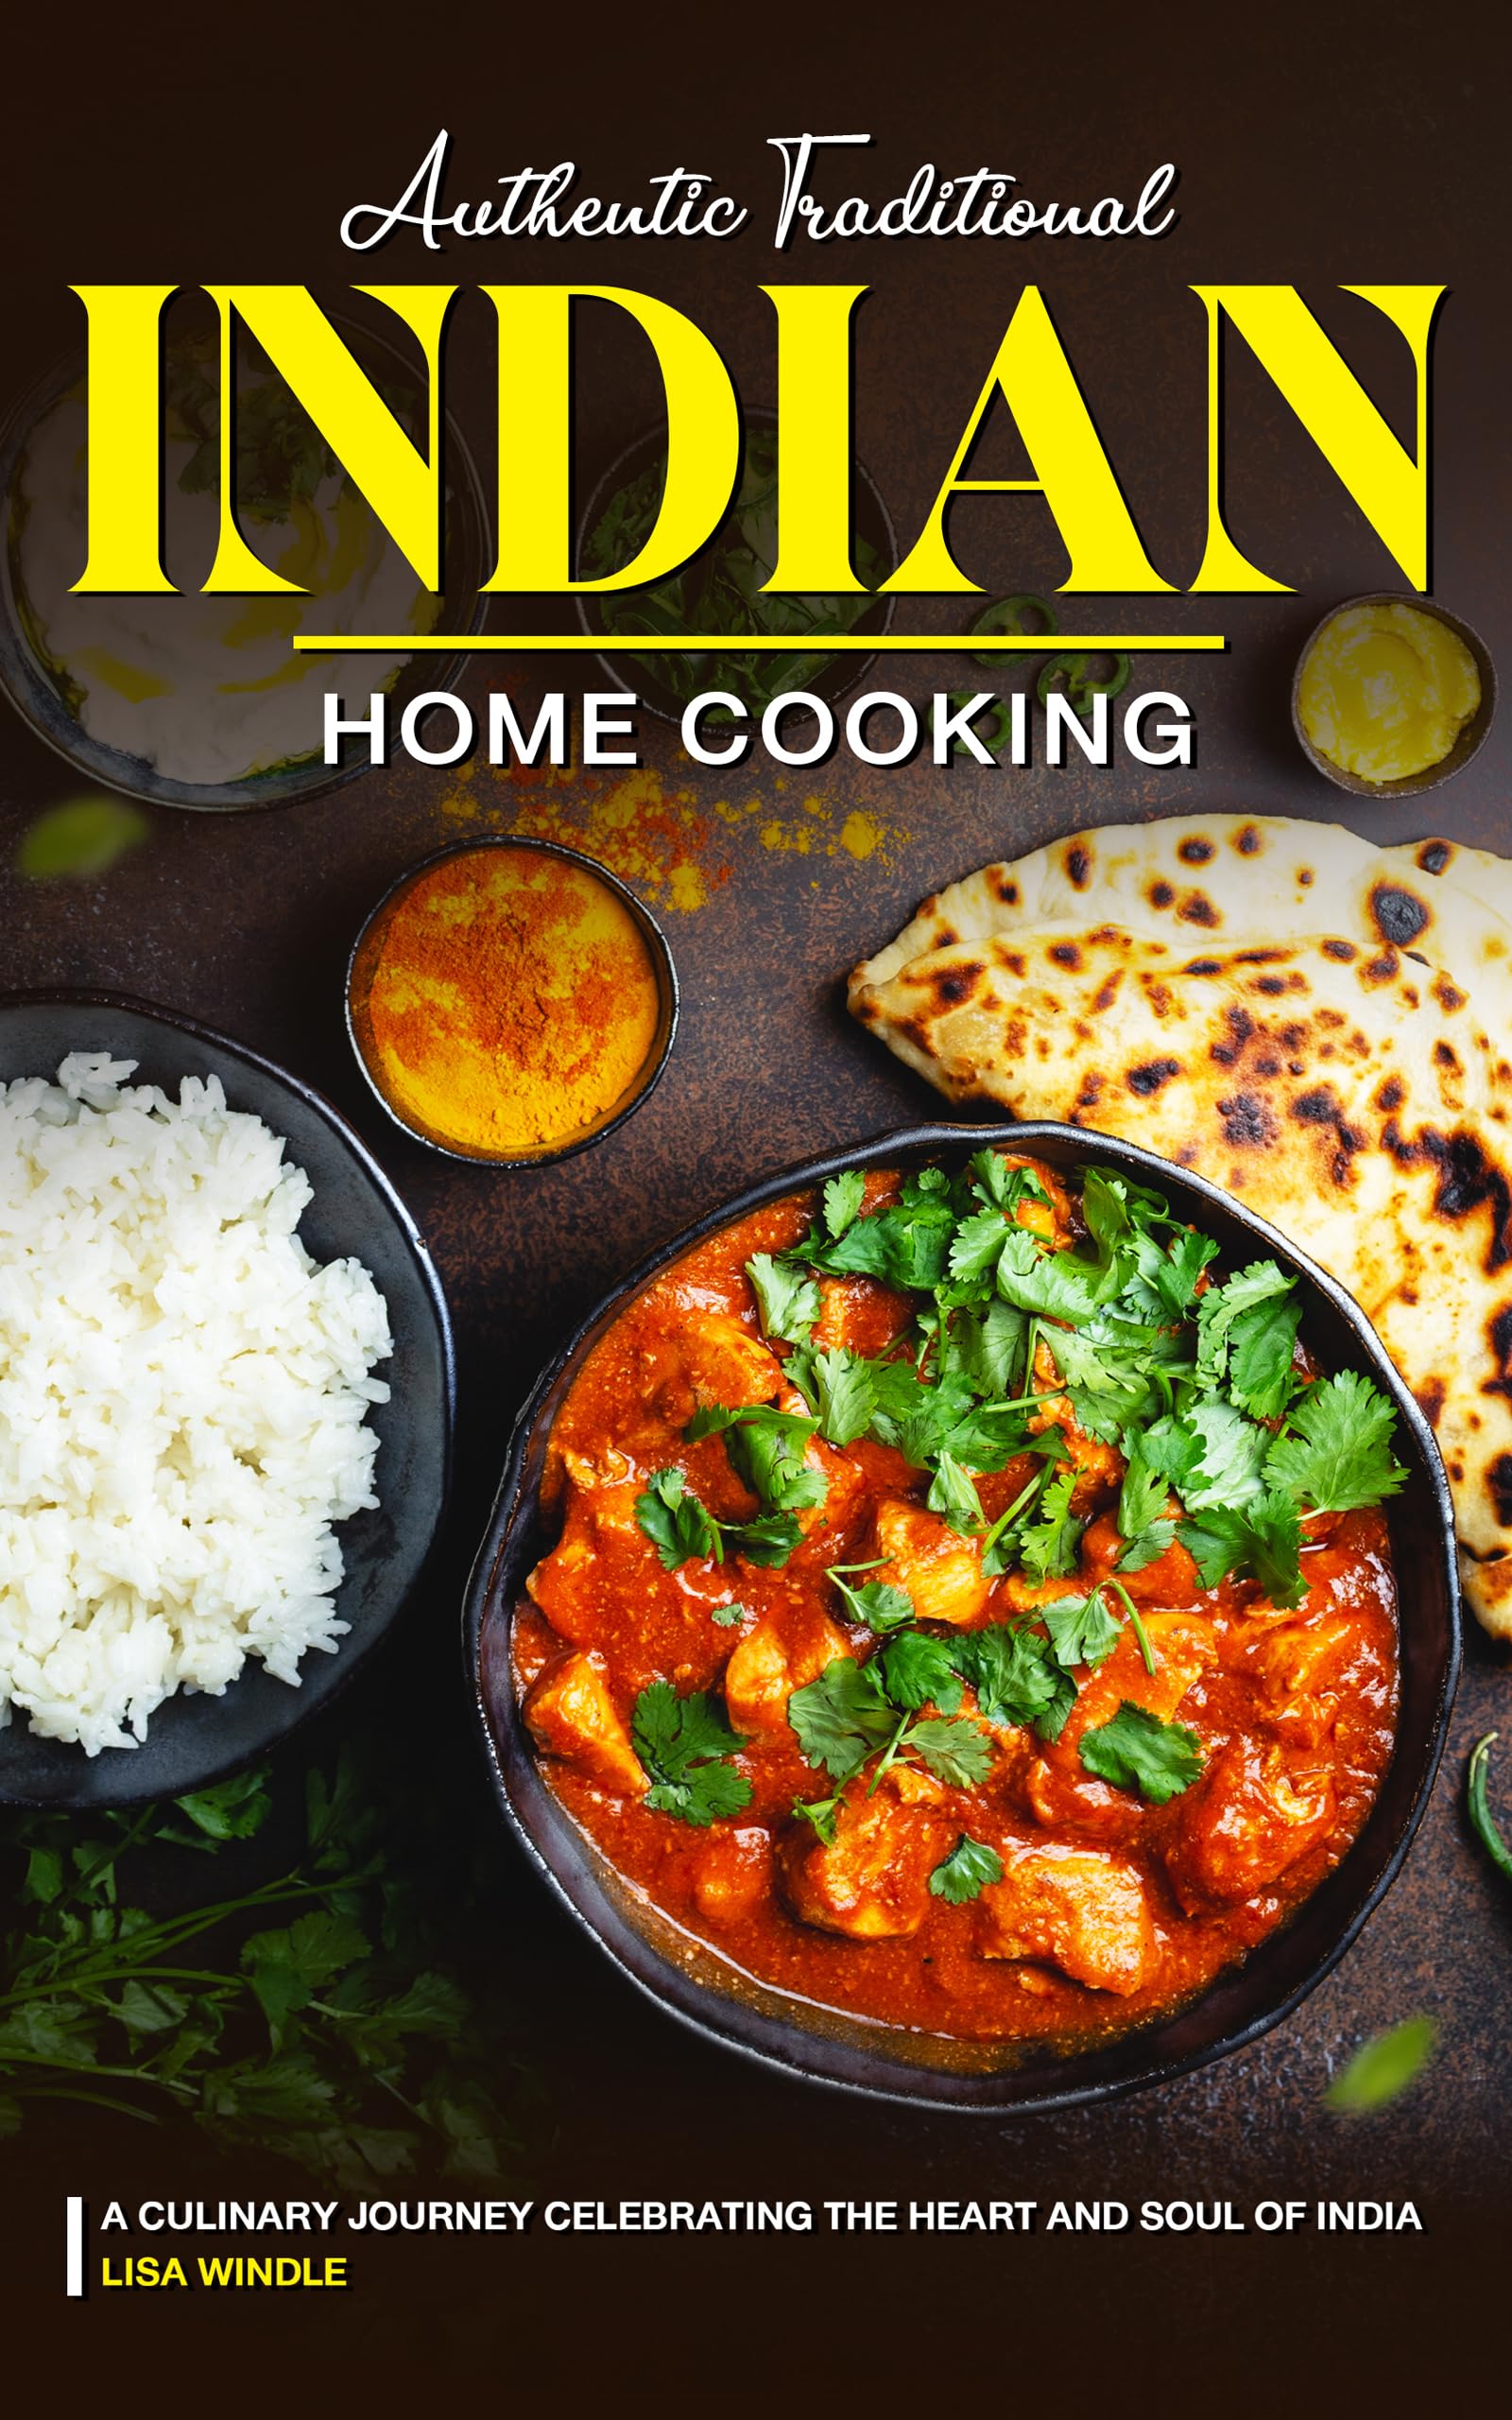 Authentic Traditional Indian Home Cooking: A Culinary Journey Celebrating the Heart and Soul of India